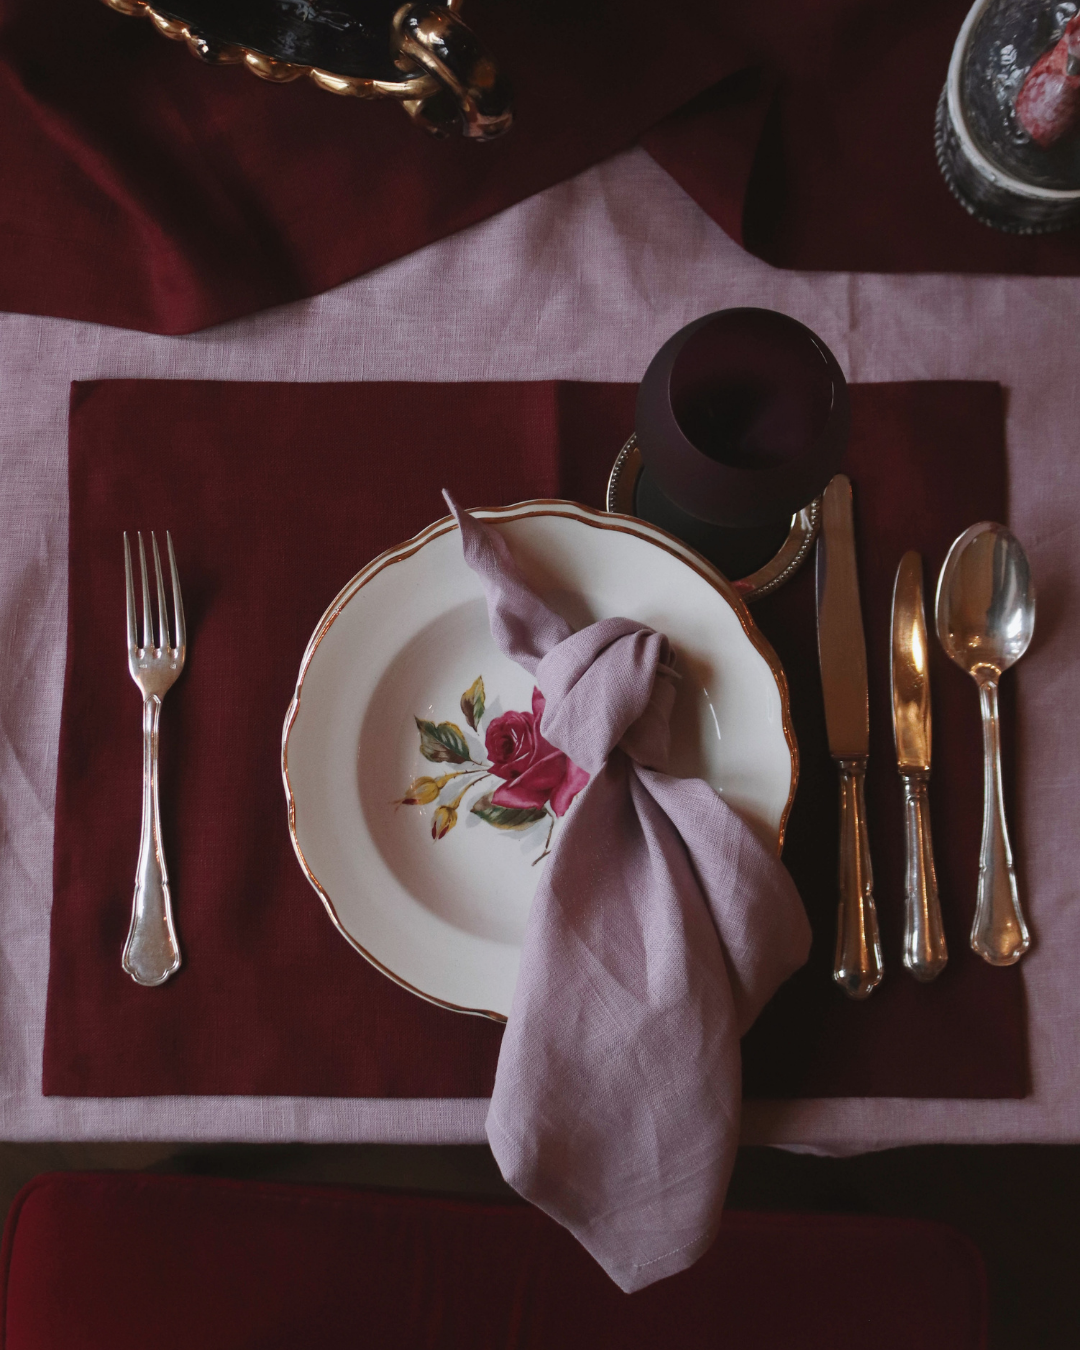 Linen table placemat in burgundy